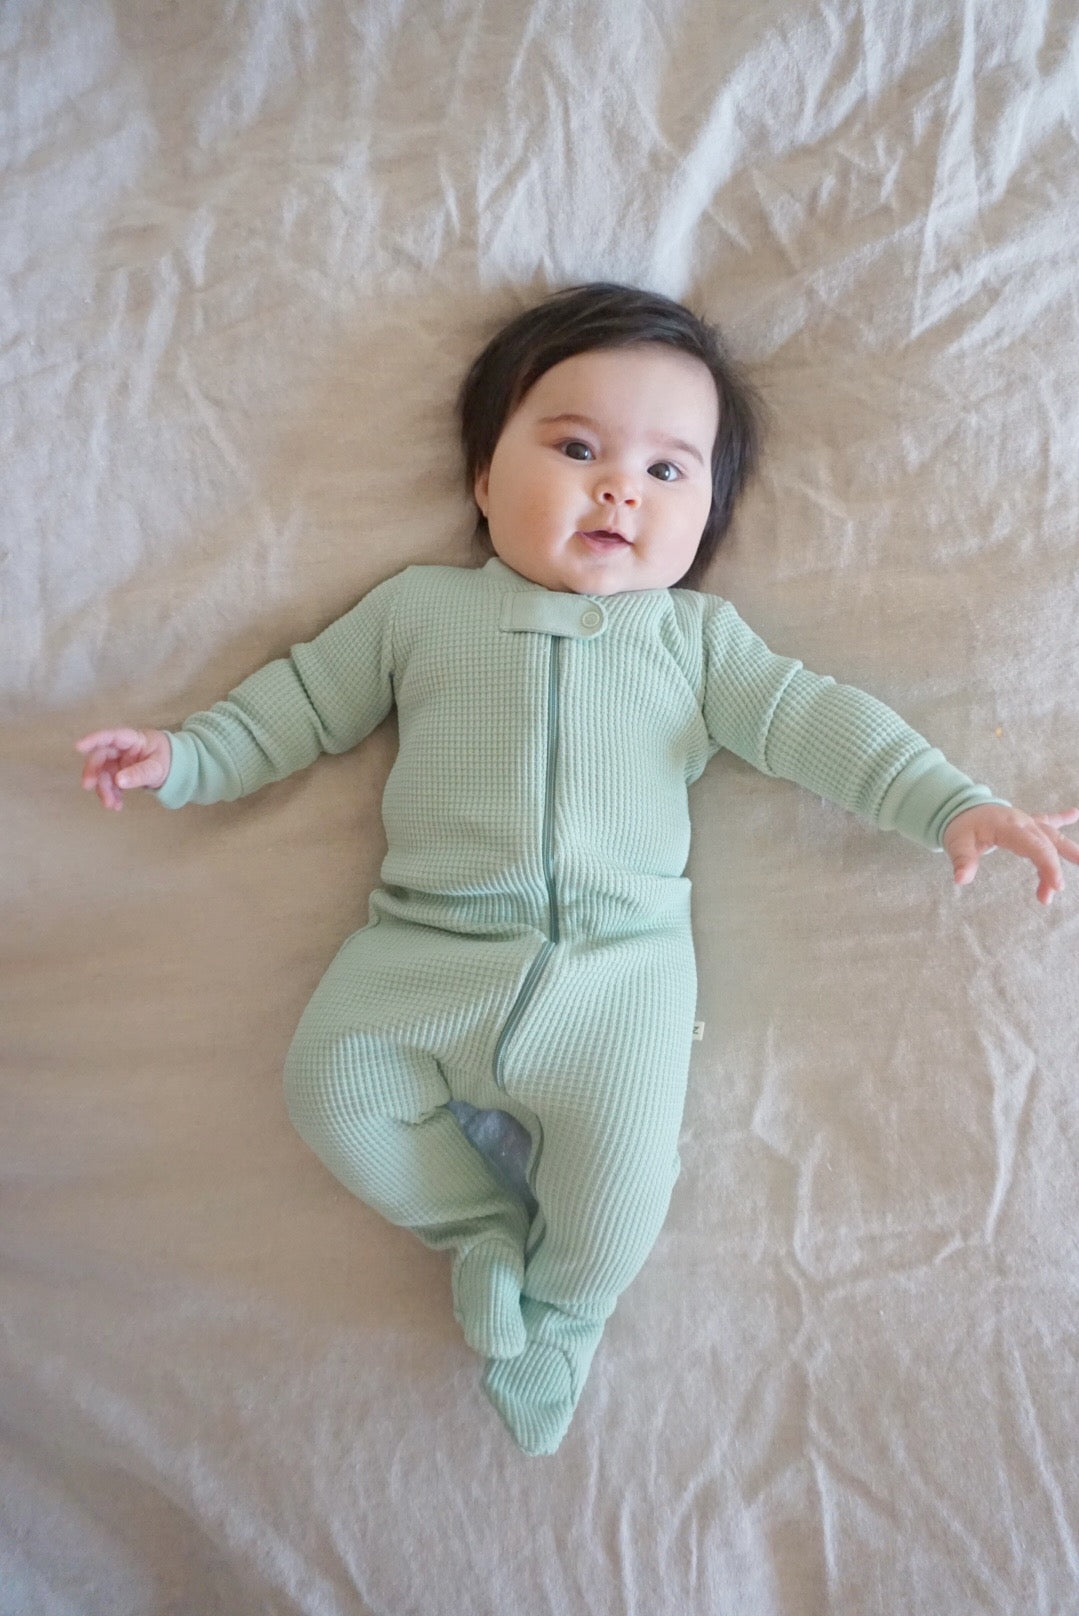 The Waffle Sleeper is made with the softest organic Pima Cotton and eco-friendly dye. The fabric is heavy enough to keep babies warm but is naturally designed to allow heat to escape off the baby's body.